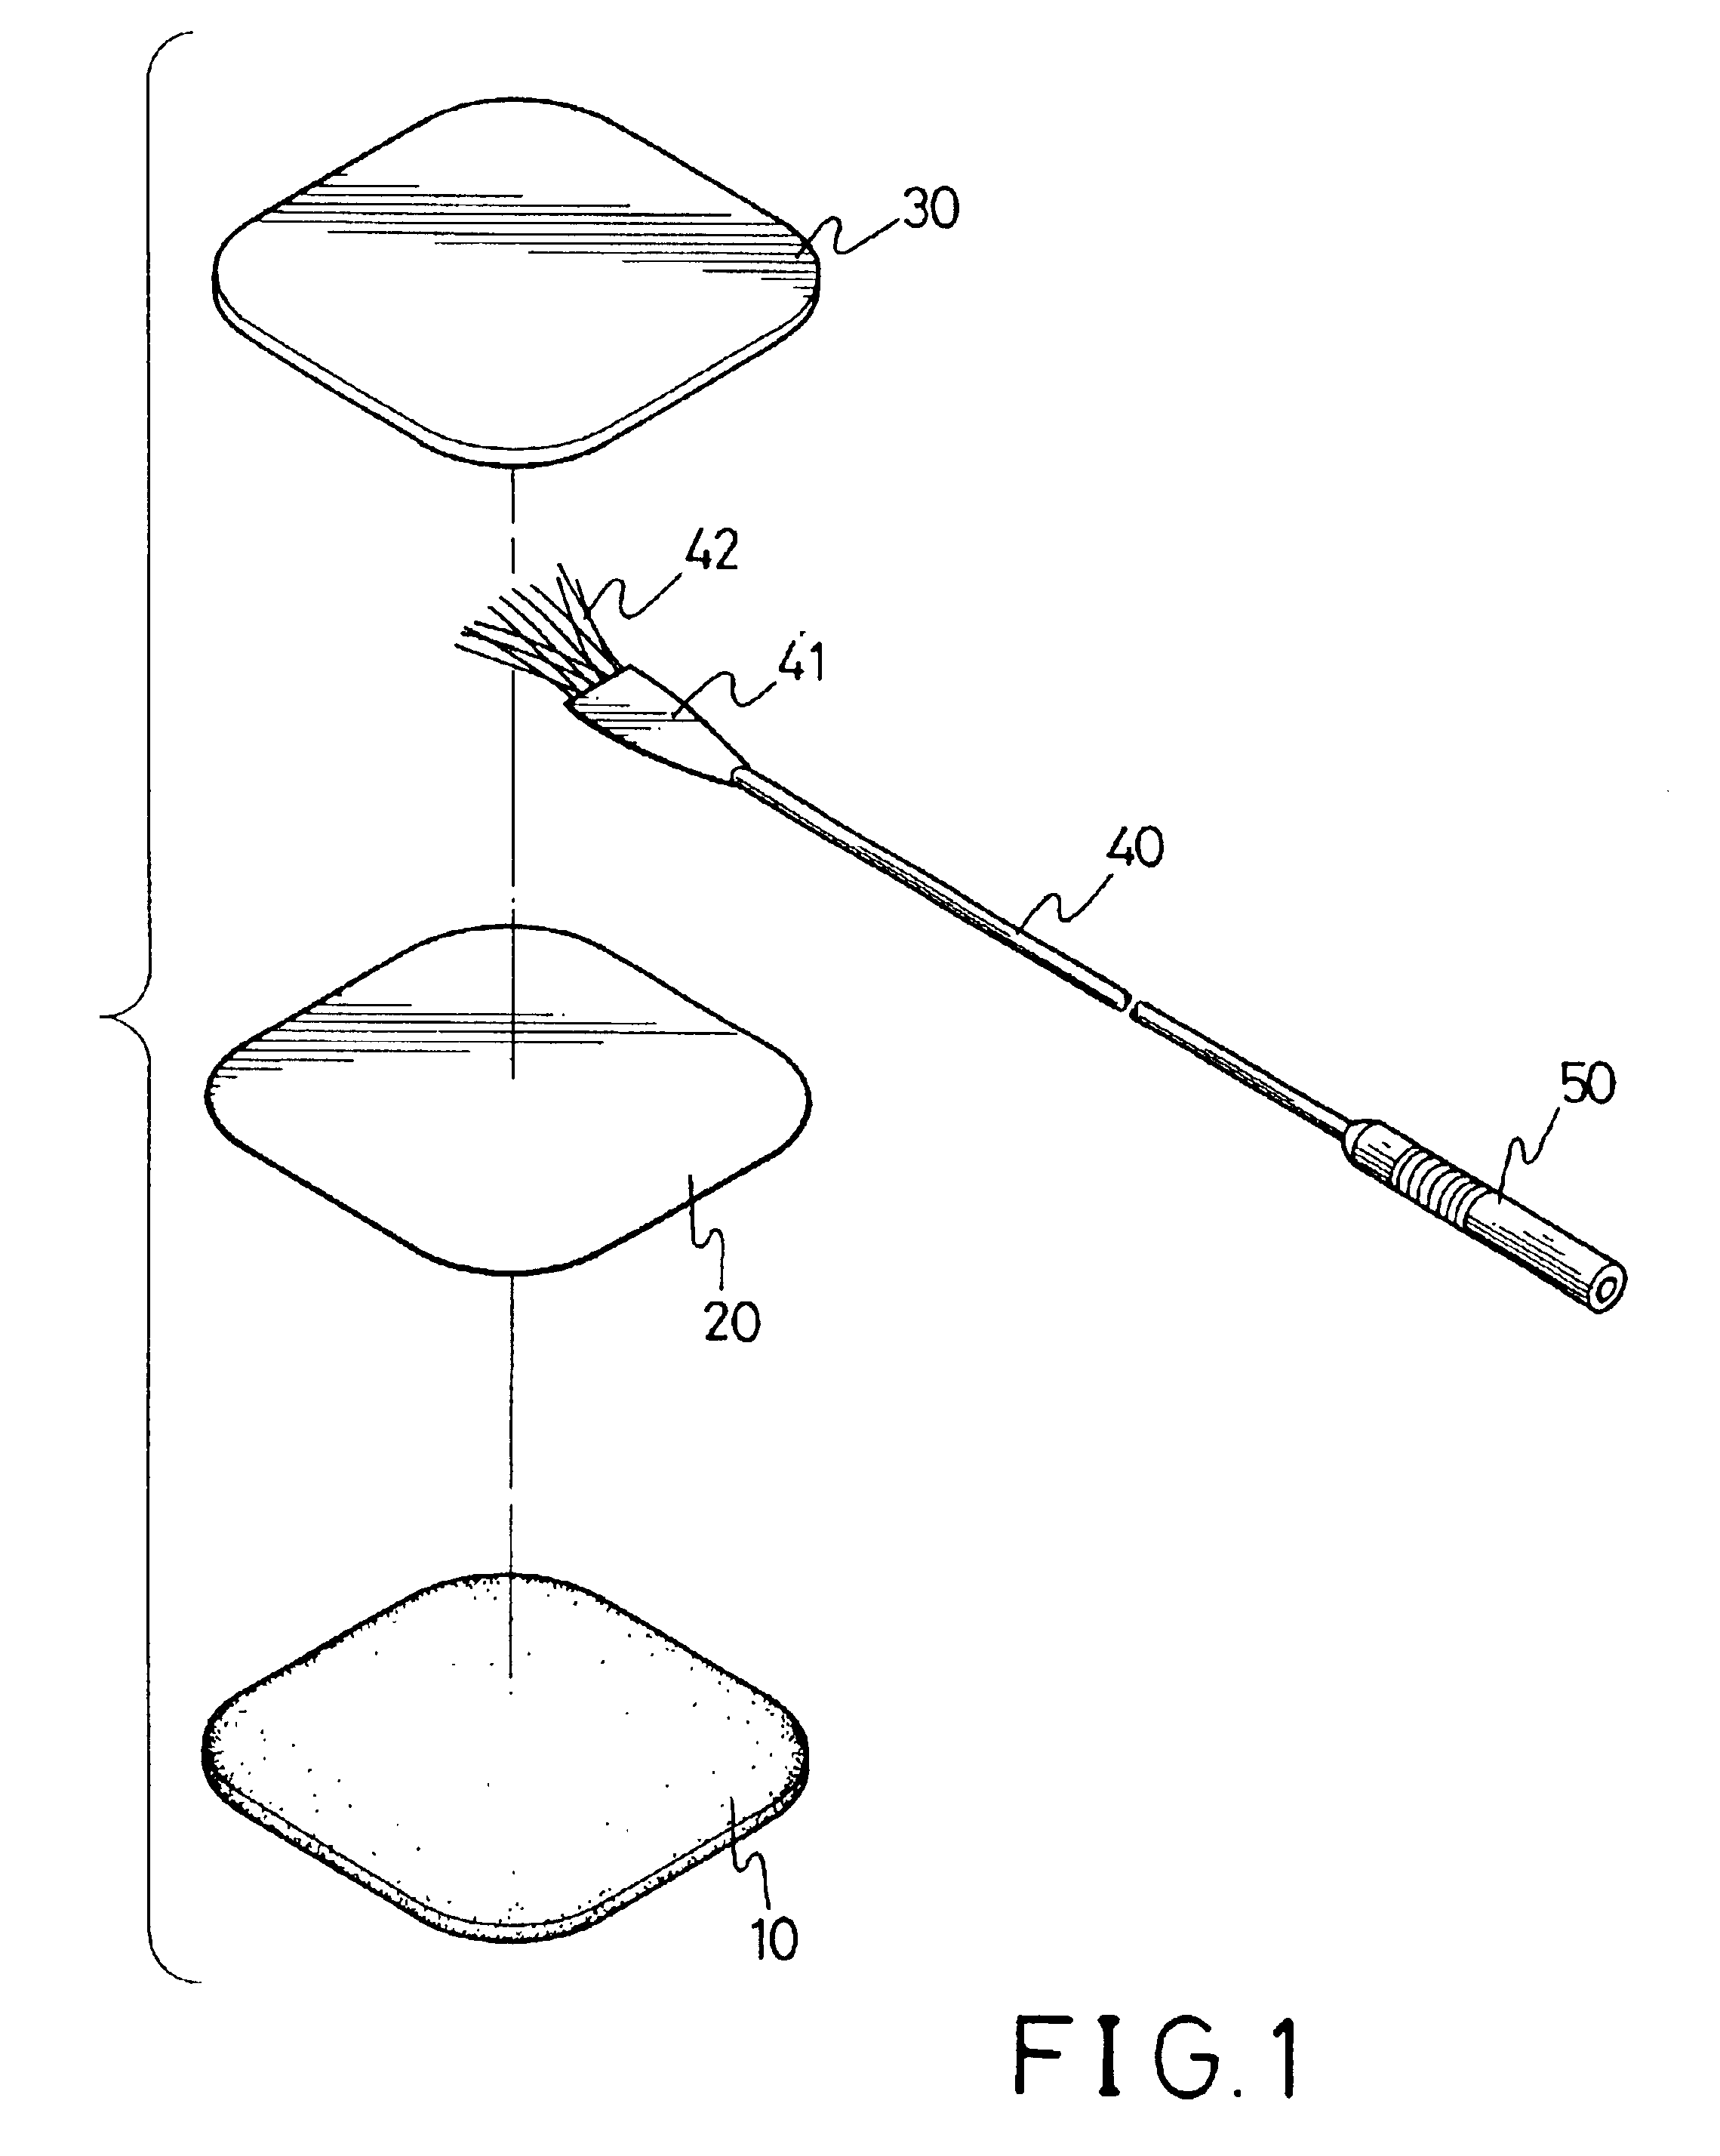 Electrodes for a transcutaneous electrical nerve stimulator